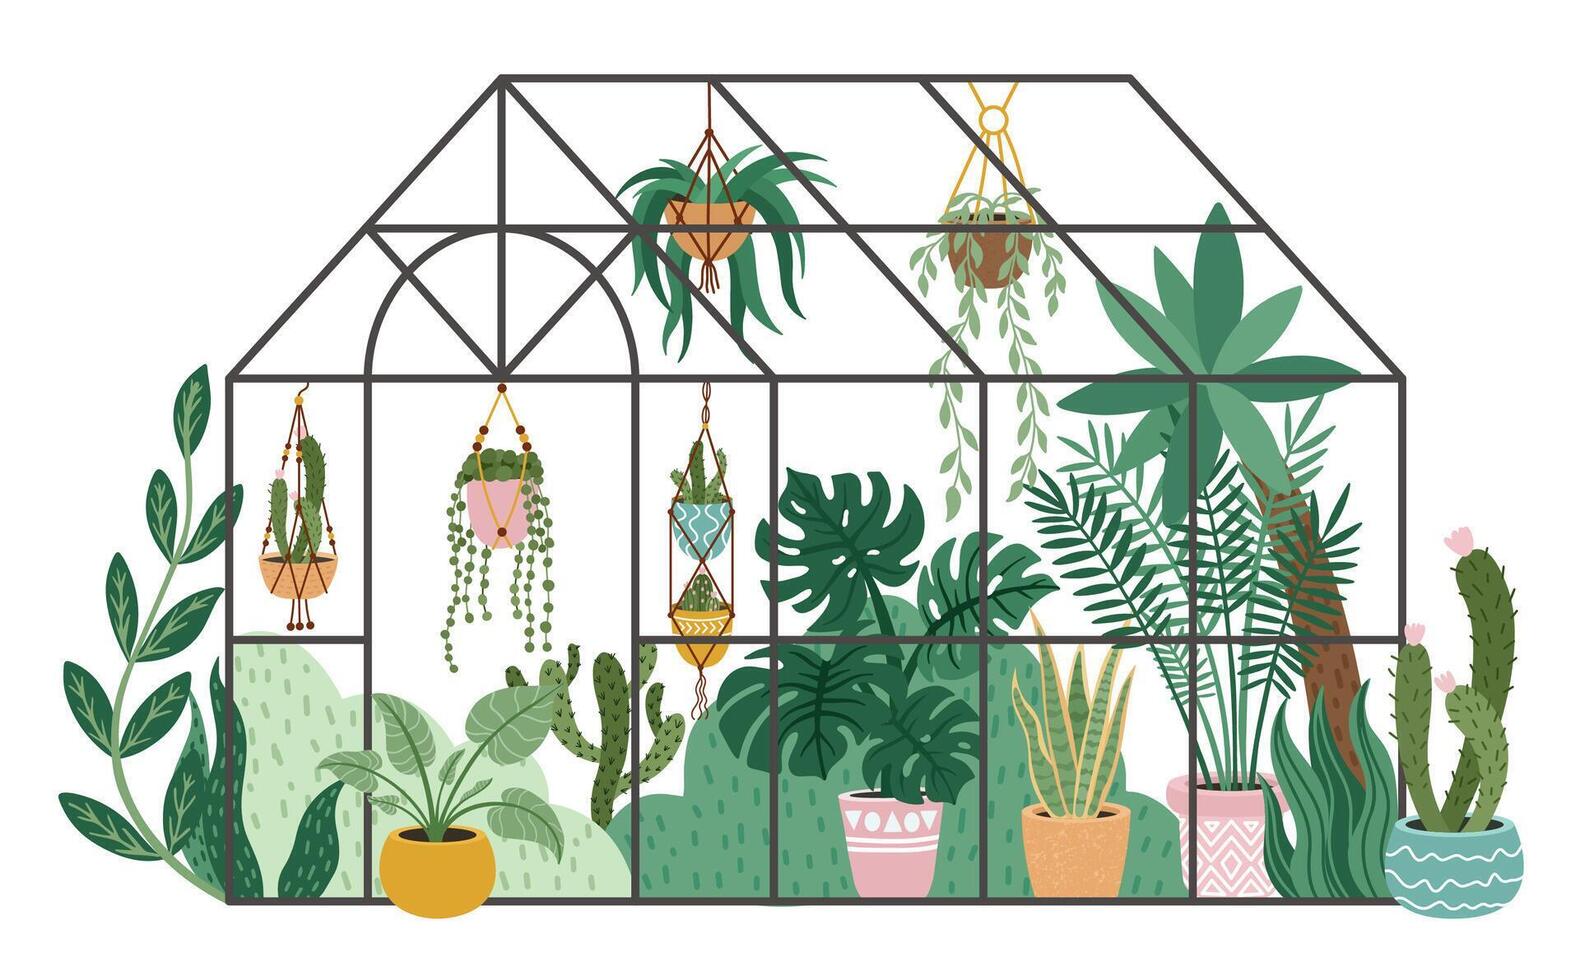 Planting greenhouse. Glass orangery, botanical garden greenhouse, flowers and potted plants home gardening isolated vector illustration